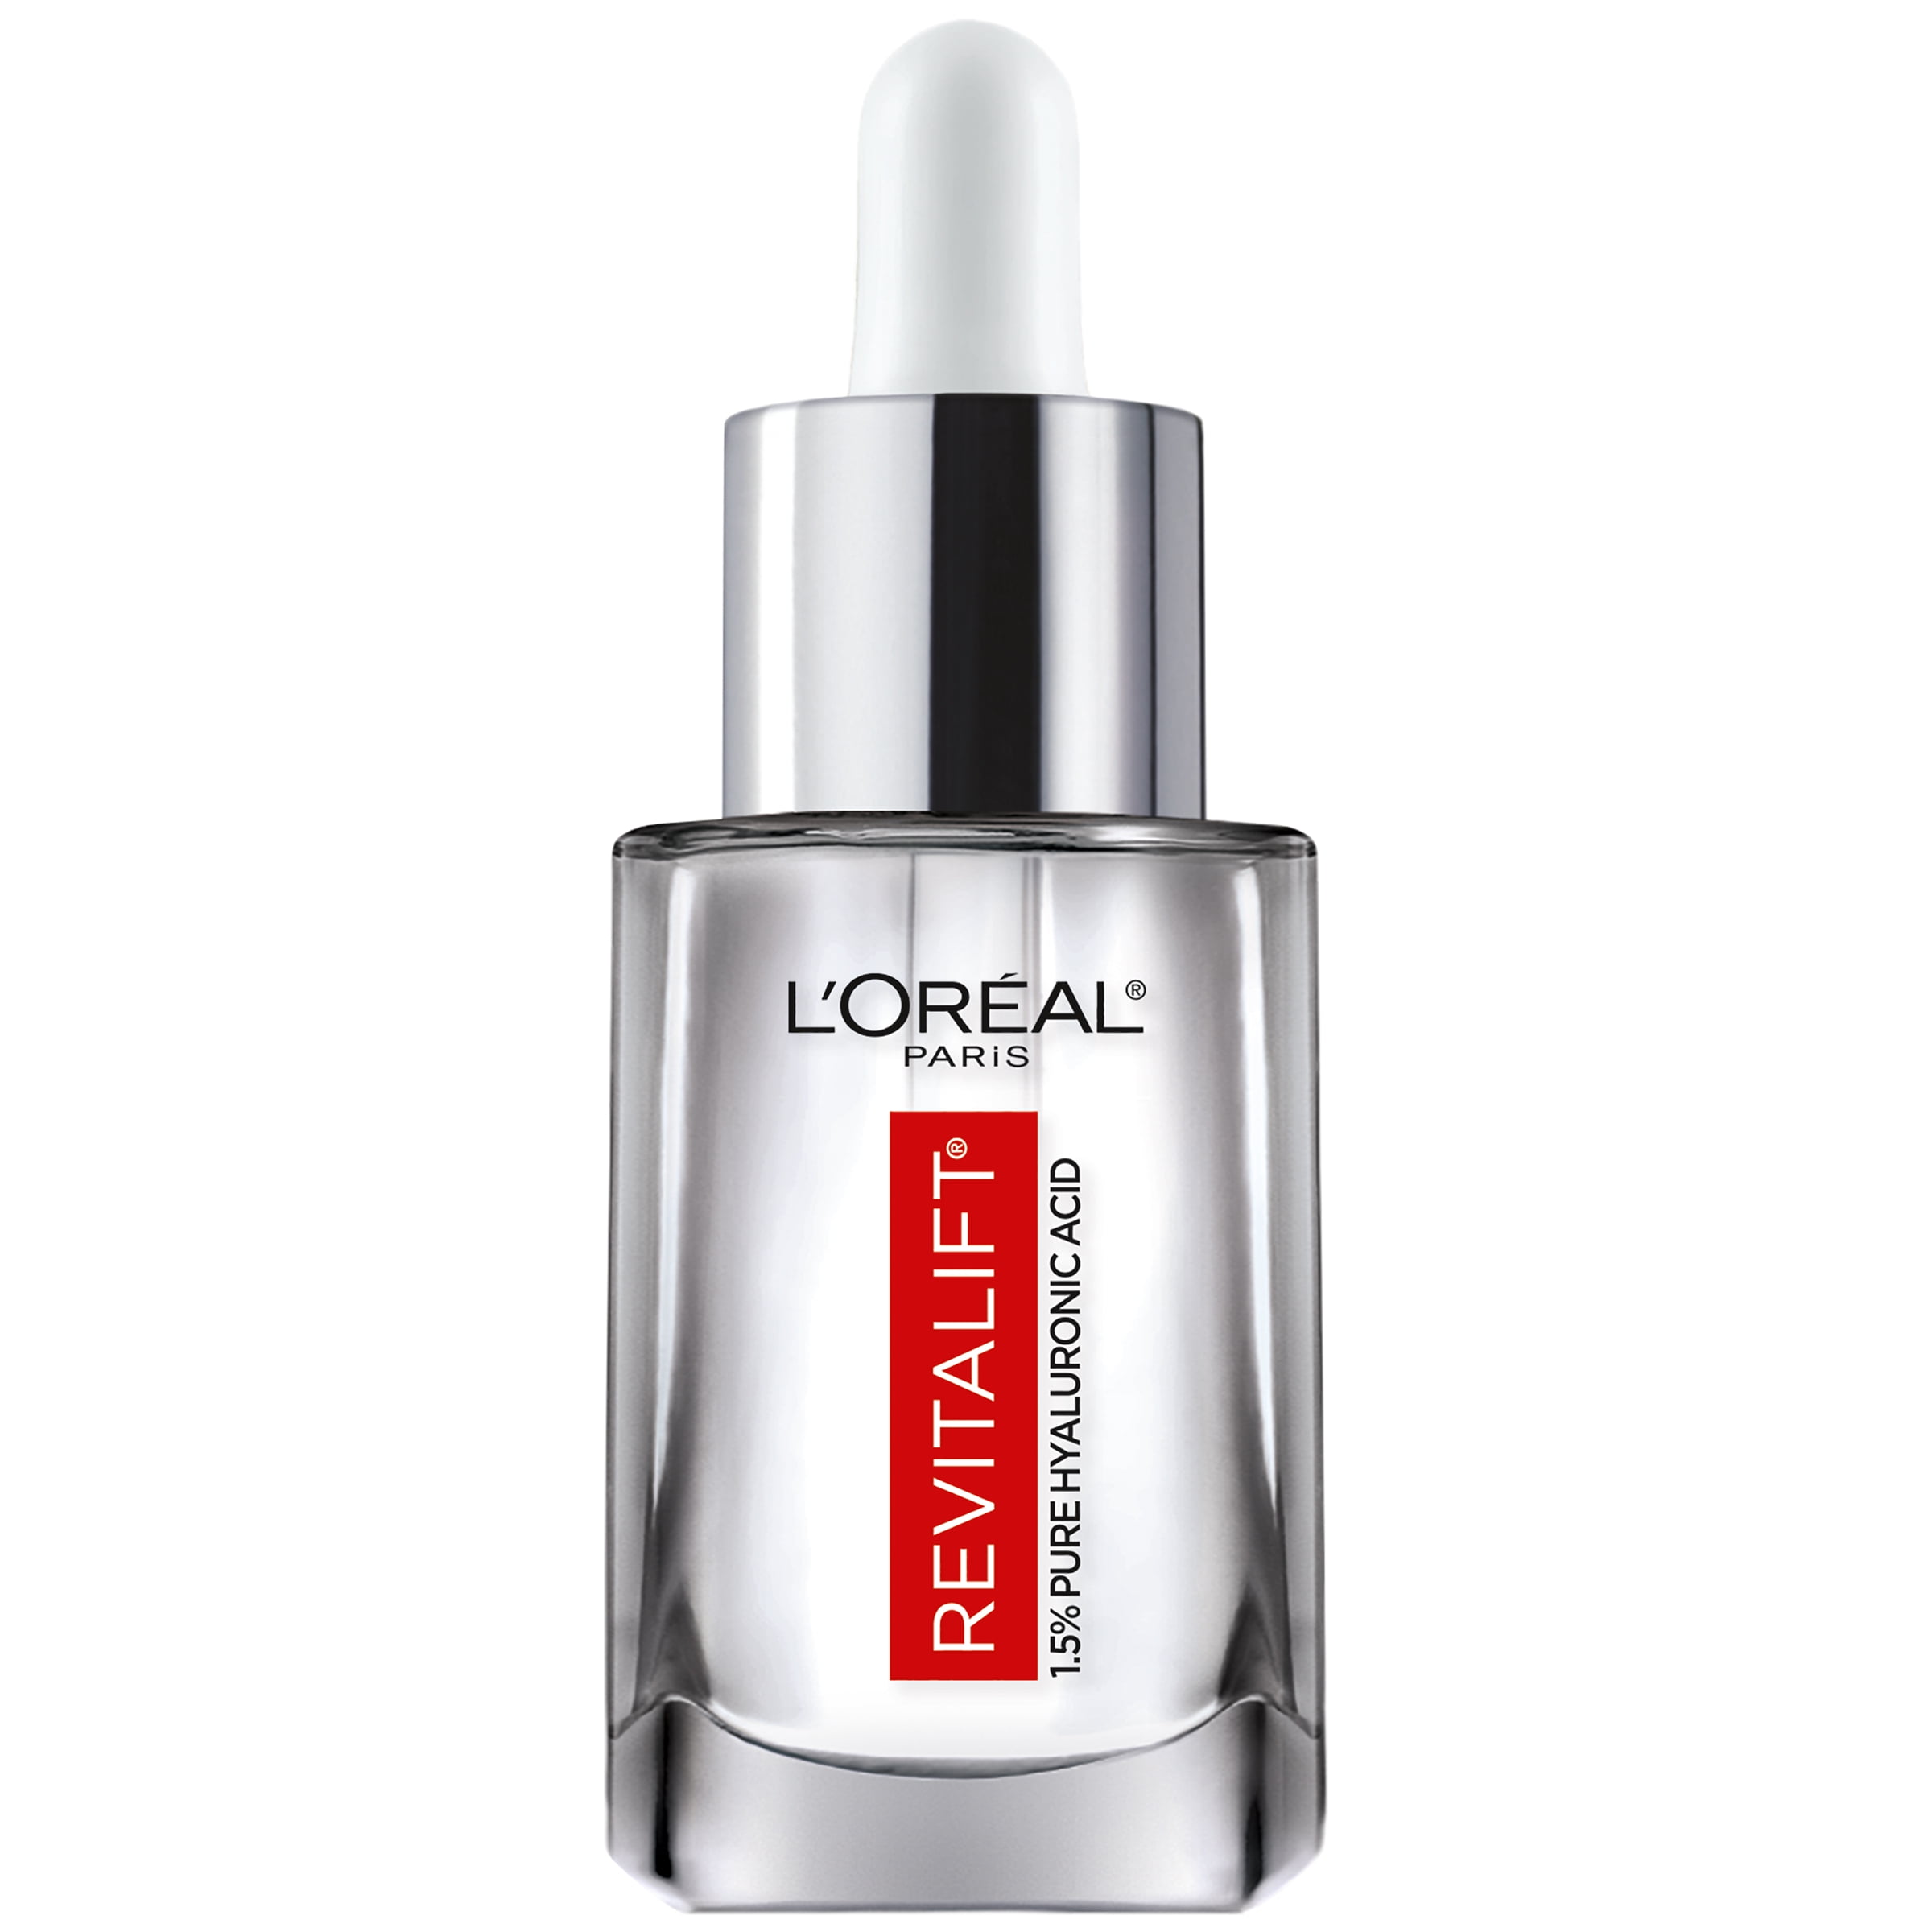 10 Best Loreal Hyaluronic Acid of 2021